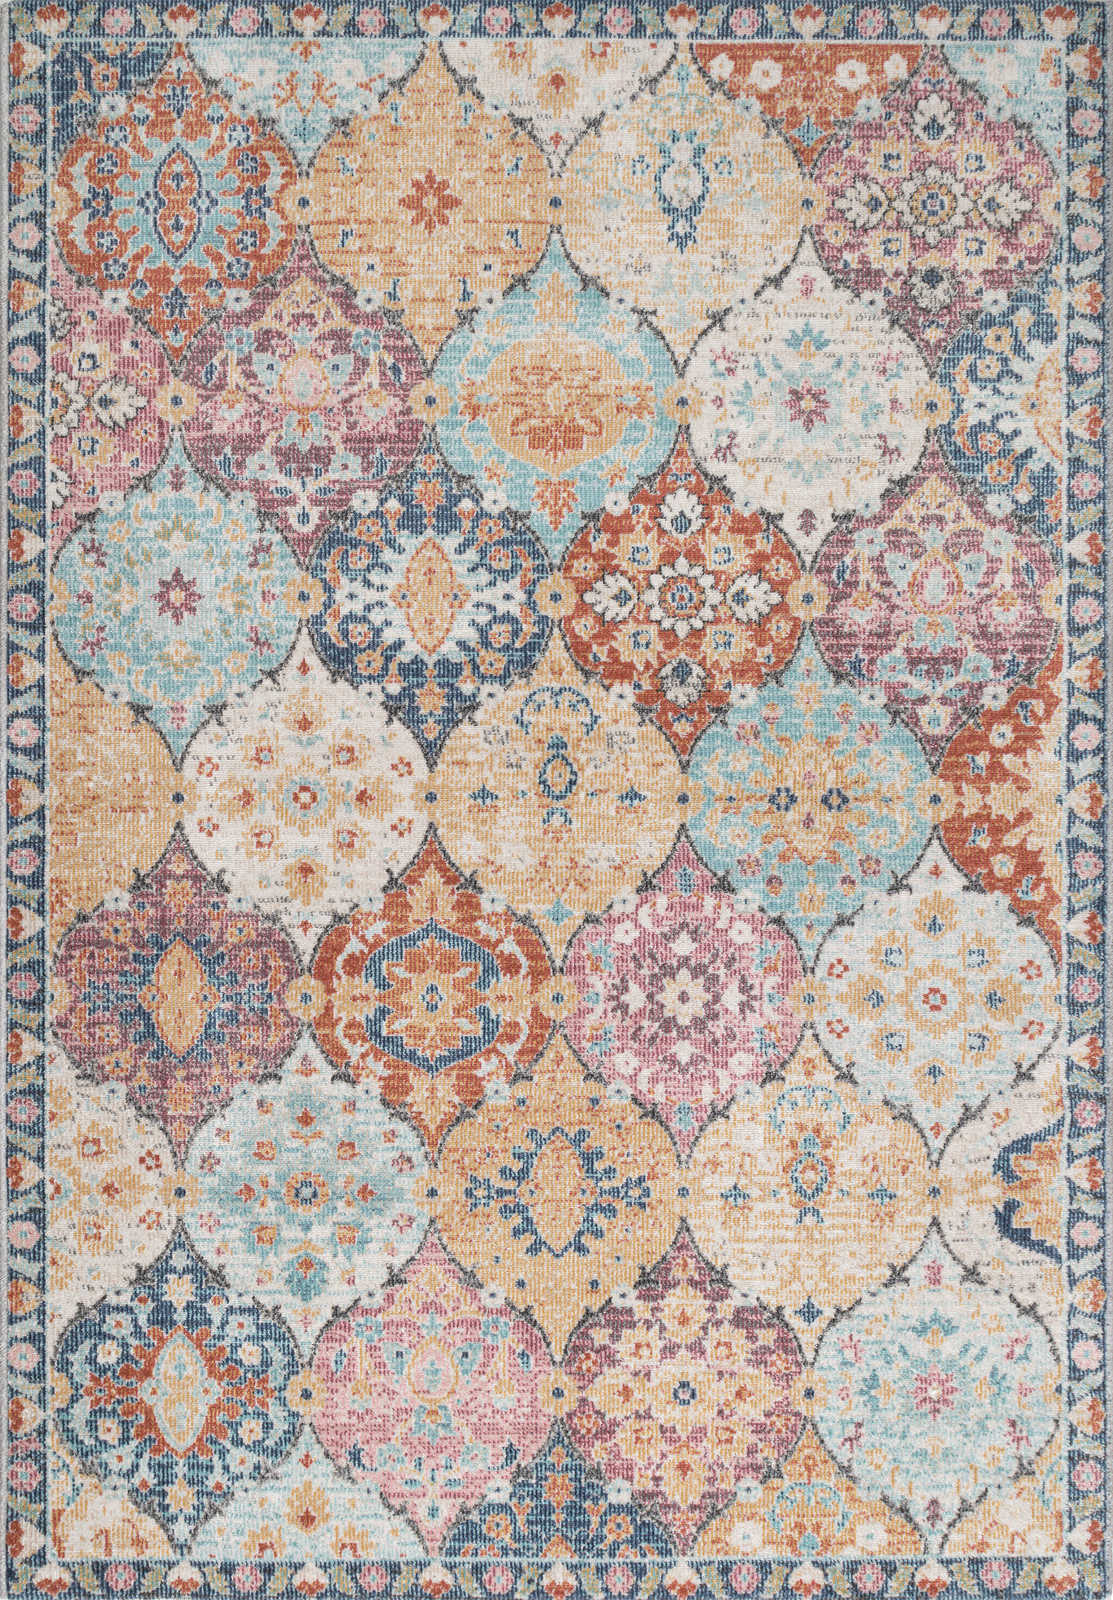             Colourful Flatweave Outdoor Rug - 170 x 120 cm
        